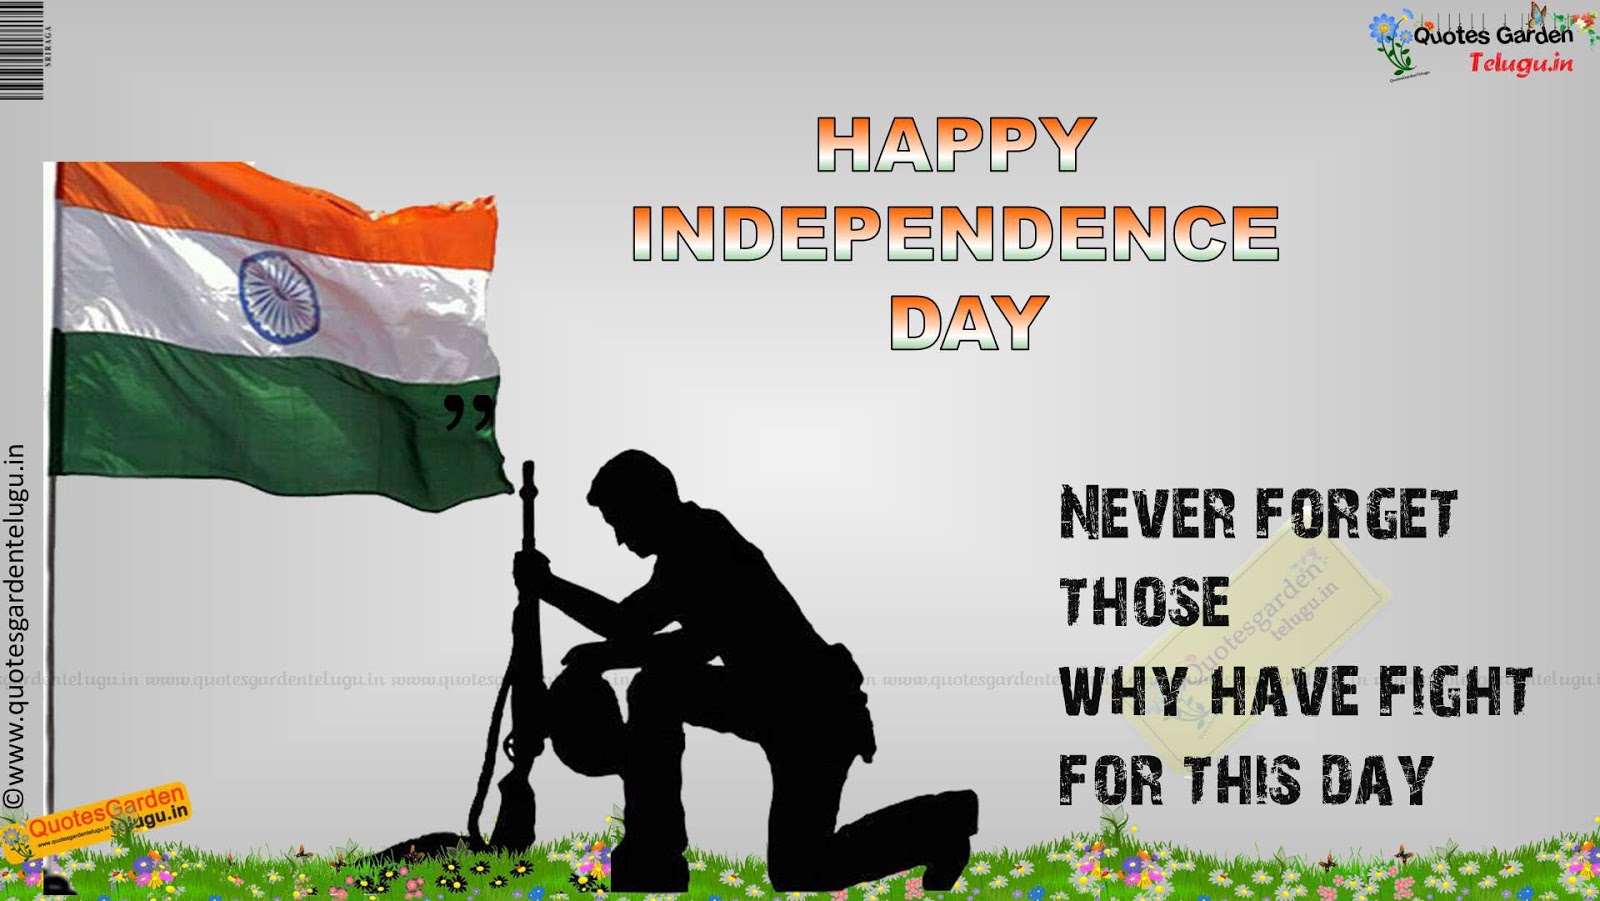 Best Independence day quotes HD wallpapers 853 | QUOTES GARDEN ...